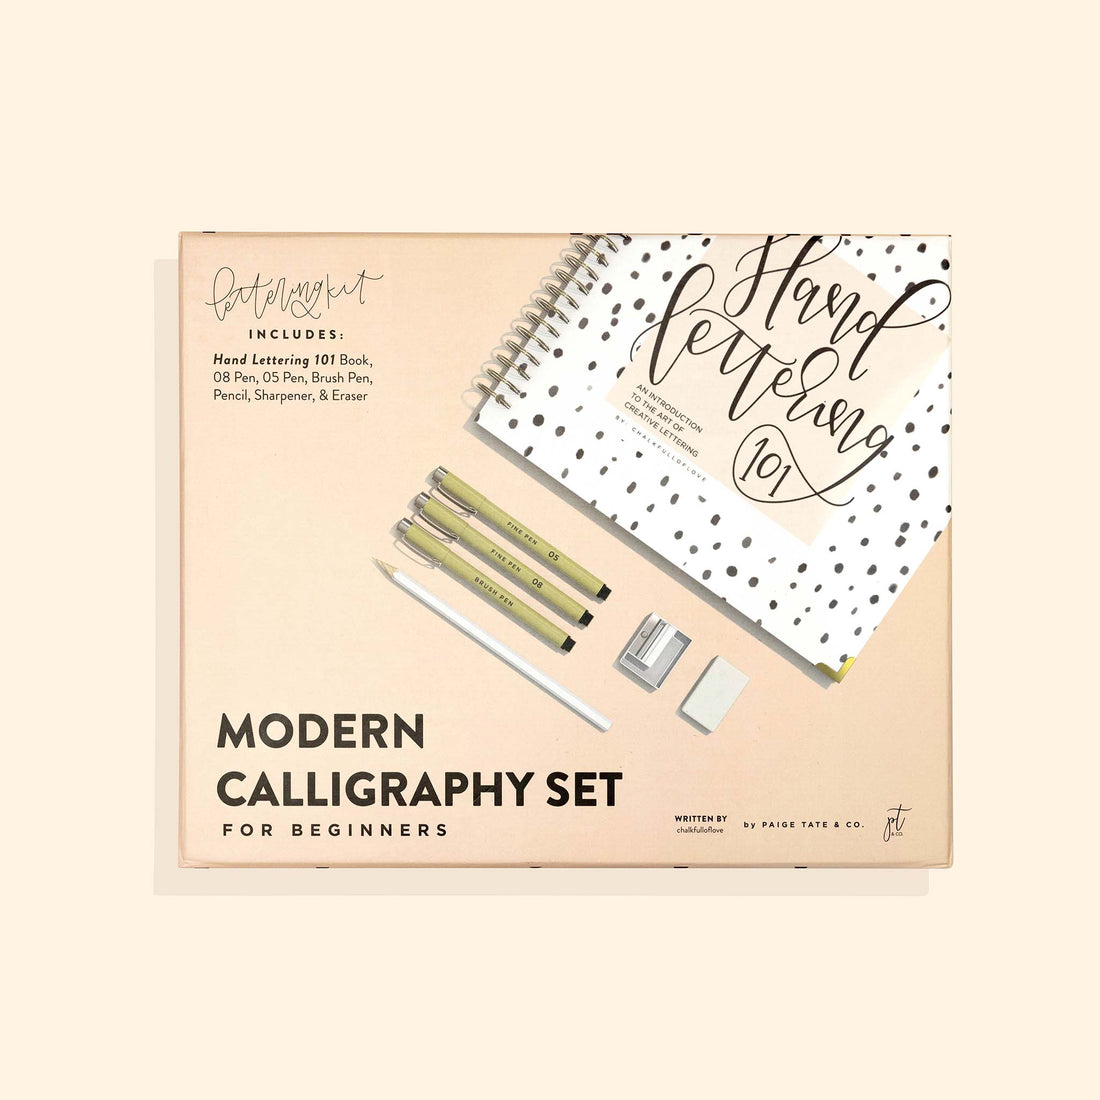 Calligraphy Paper: Writing and Practice Paper. Hand Lettering Workbook for Artist and Beginners